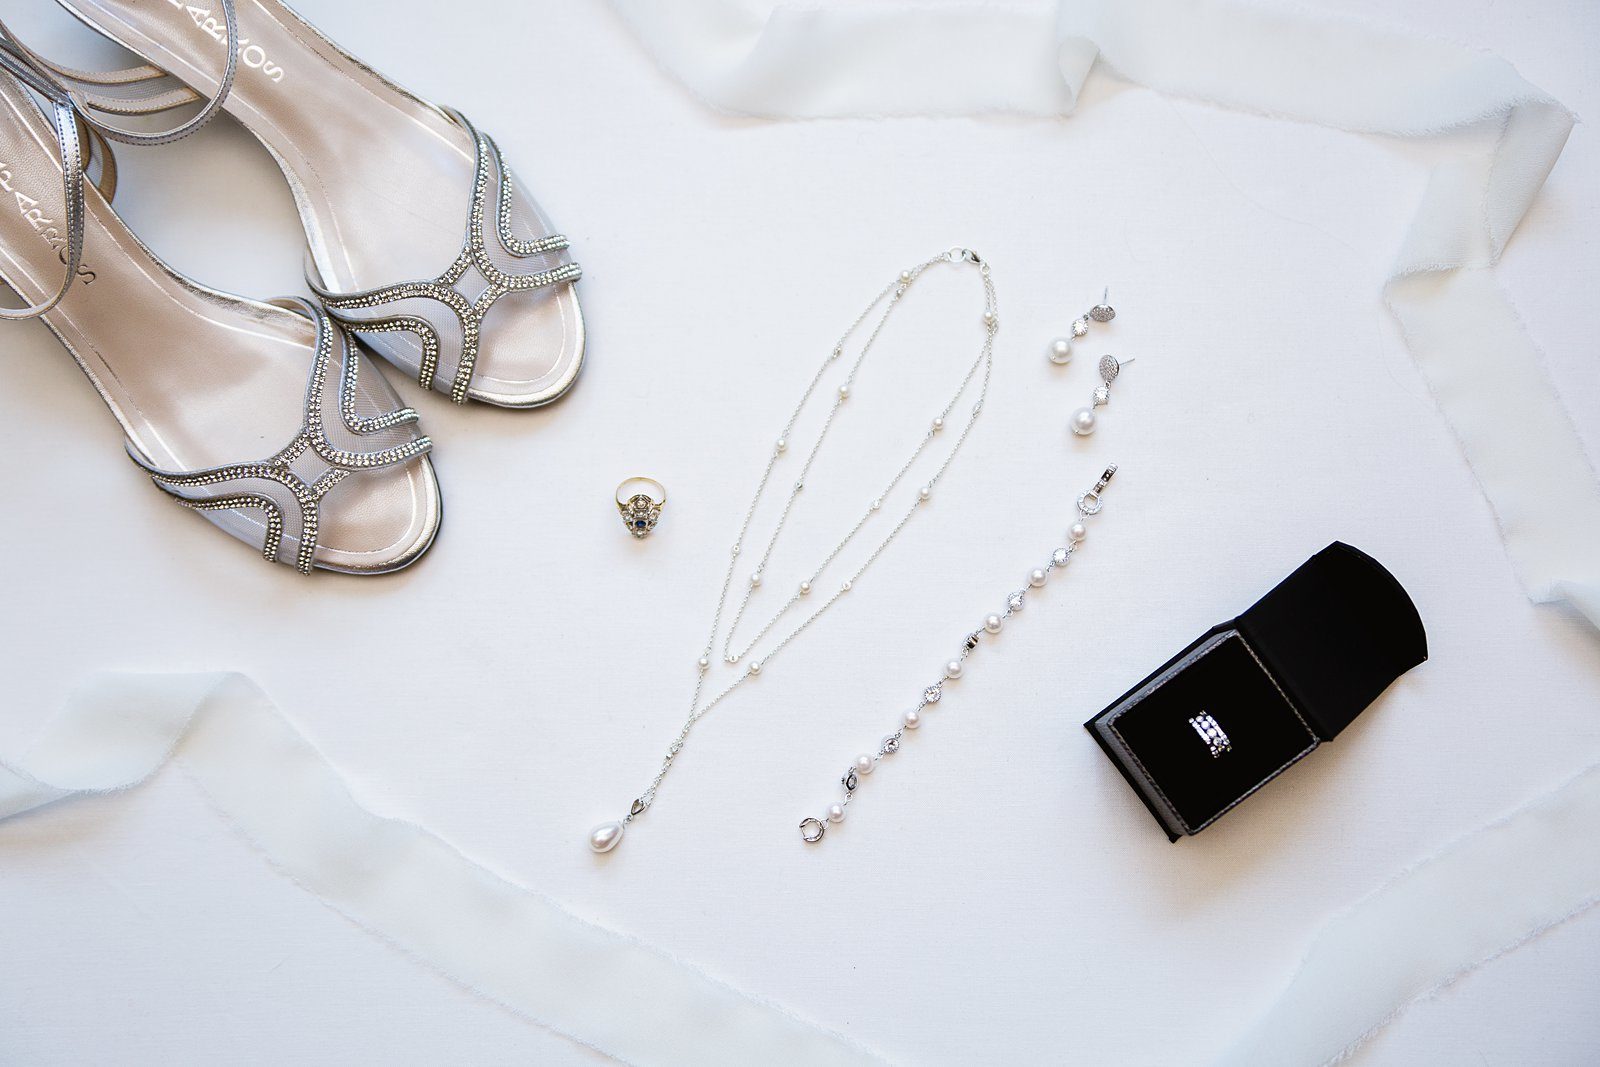 Bride's wedding day details of her diy jewelry, silver wedding shoes, antique ring, and stacking wedding bands by PMA Photography.